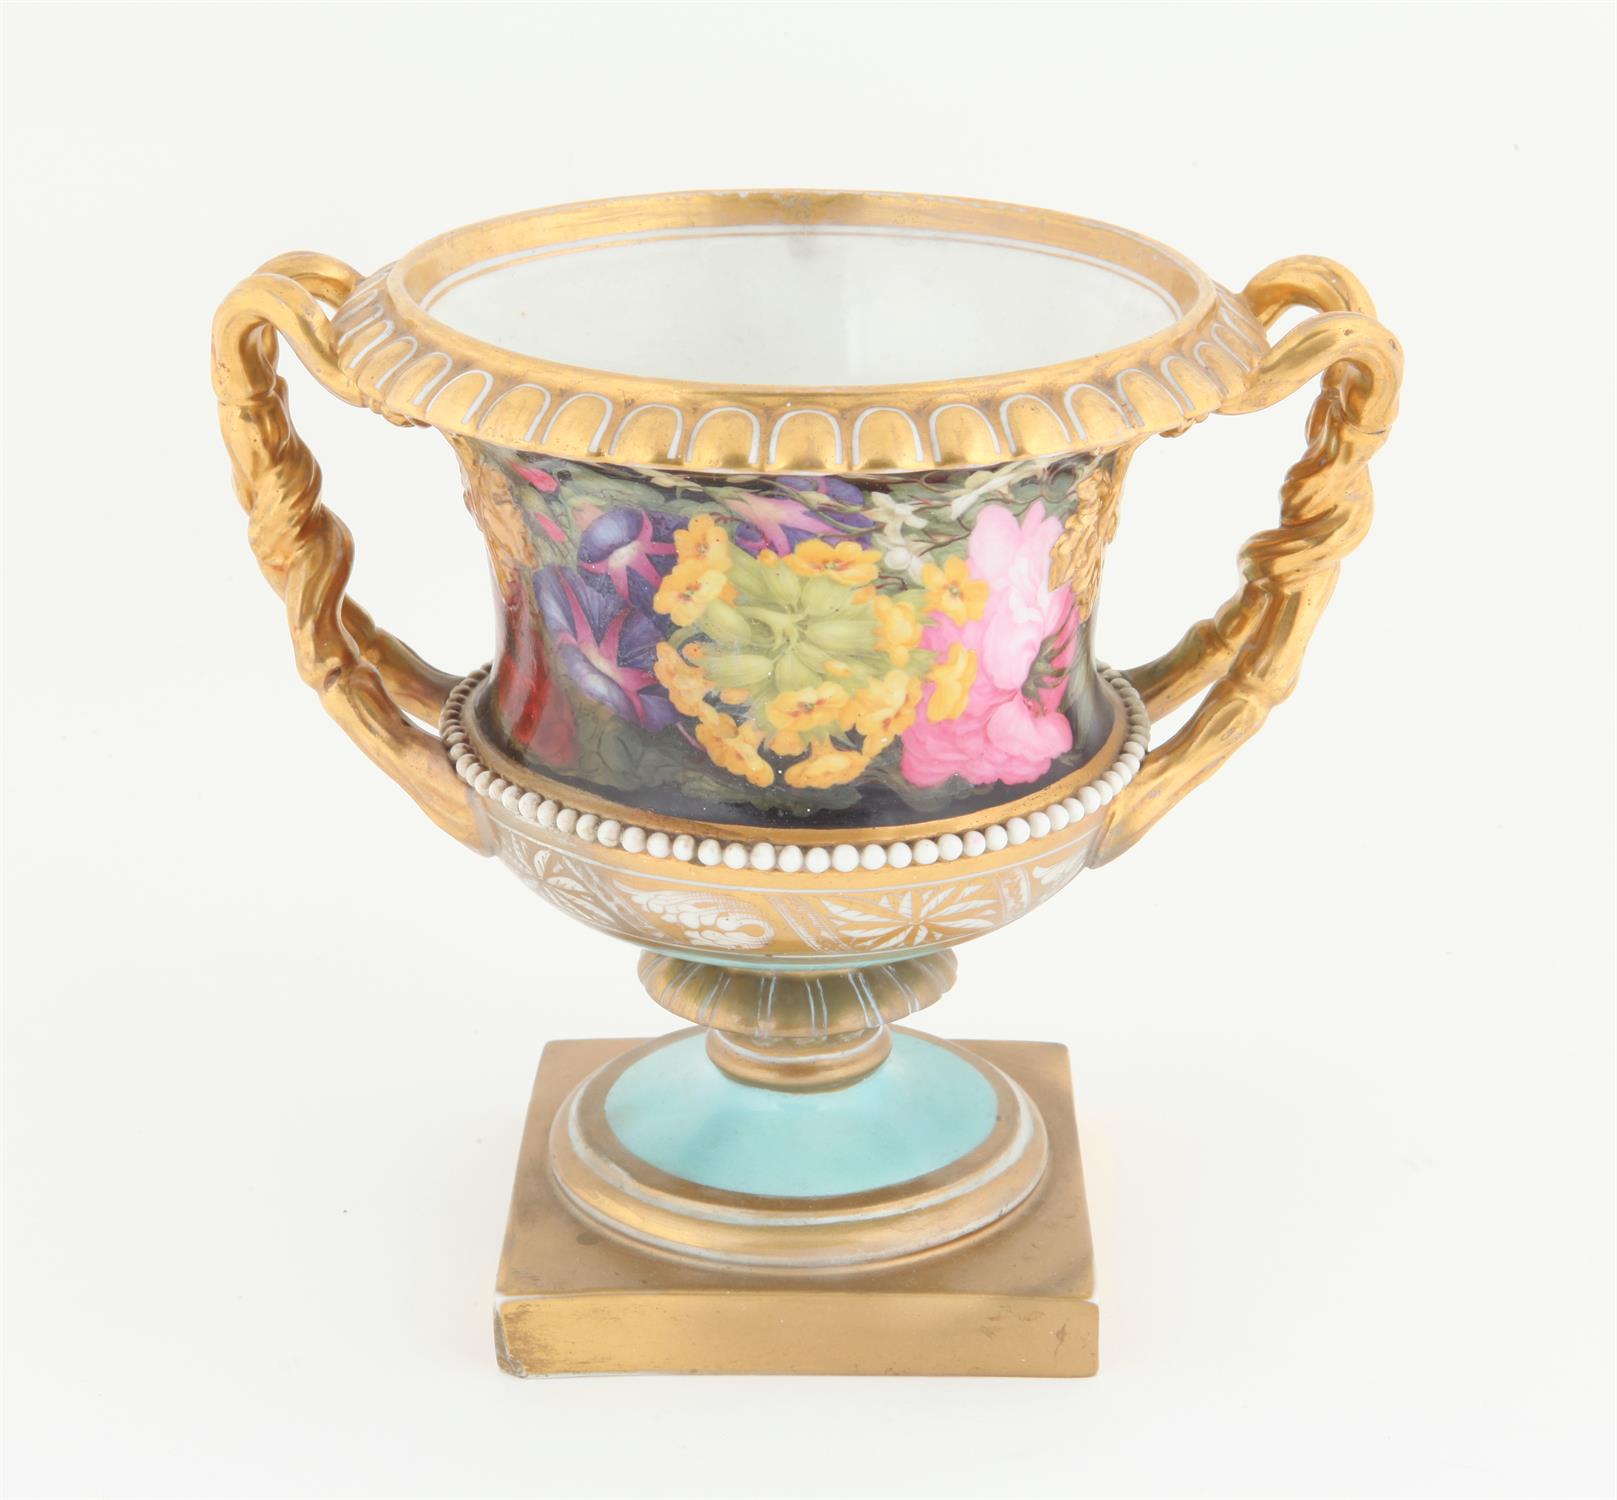 Barr, Flight and Barr painted porcelain urn, early 19th century, of 'Warwick Vase' shape the gilt